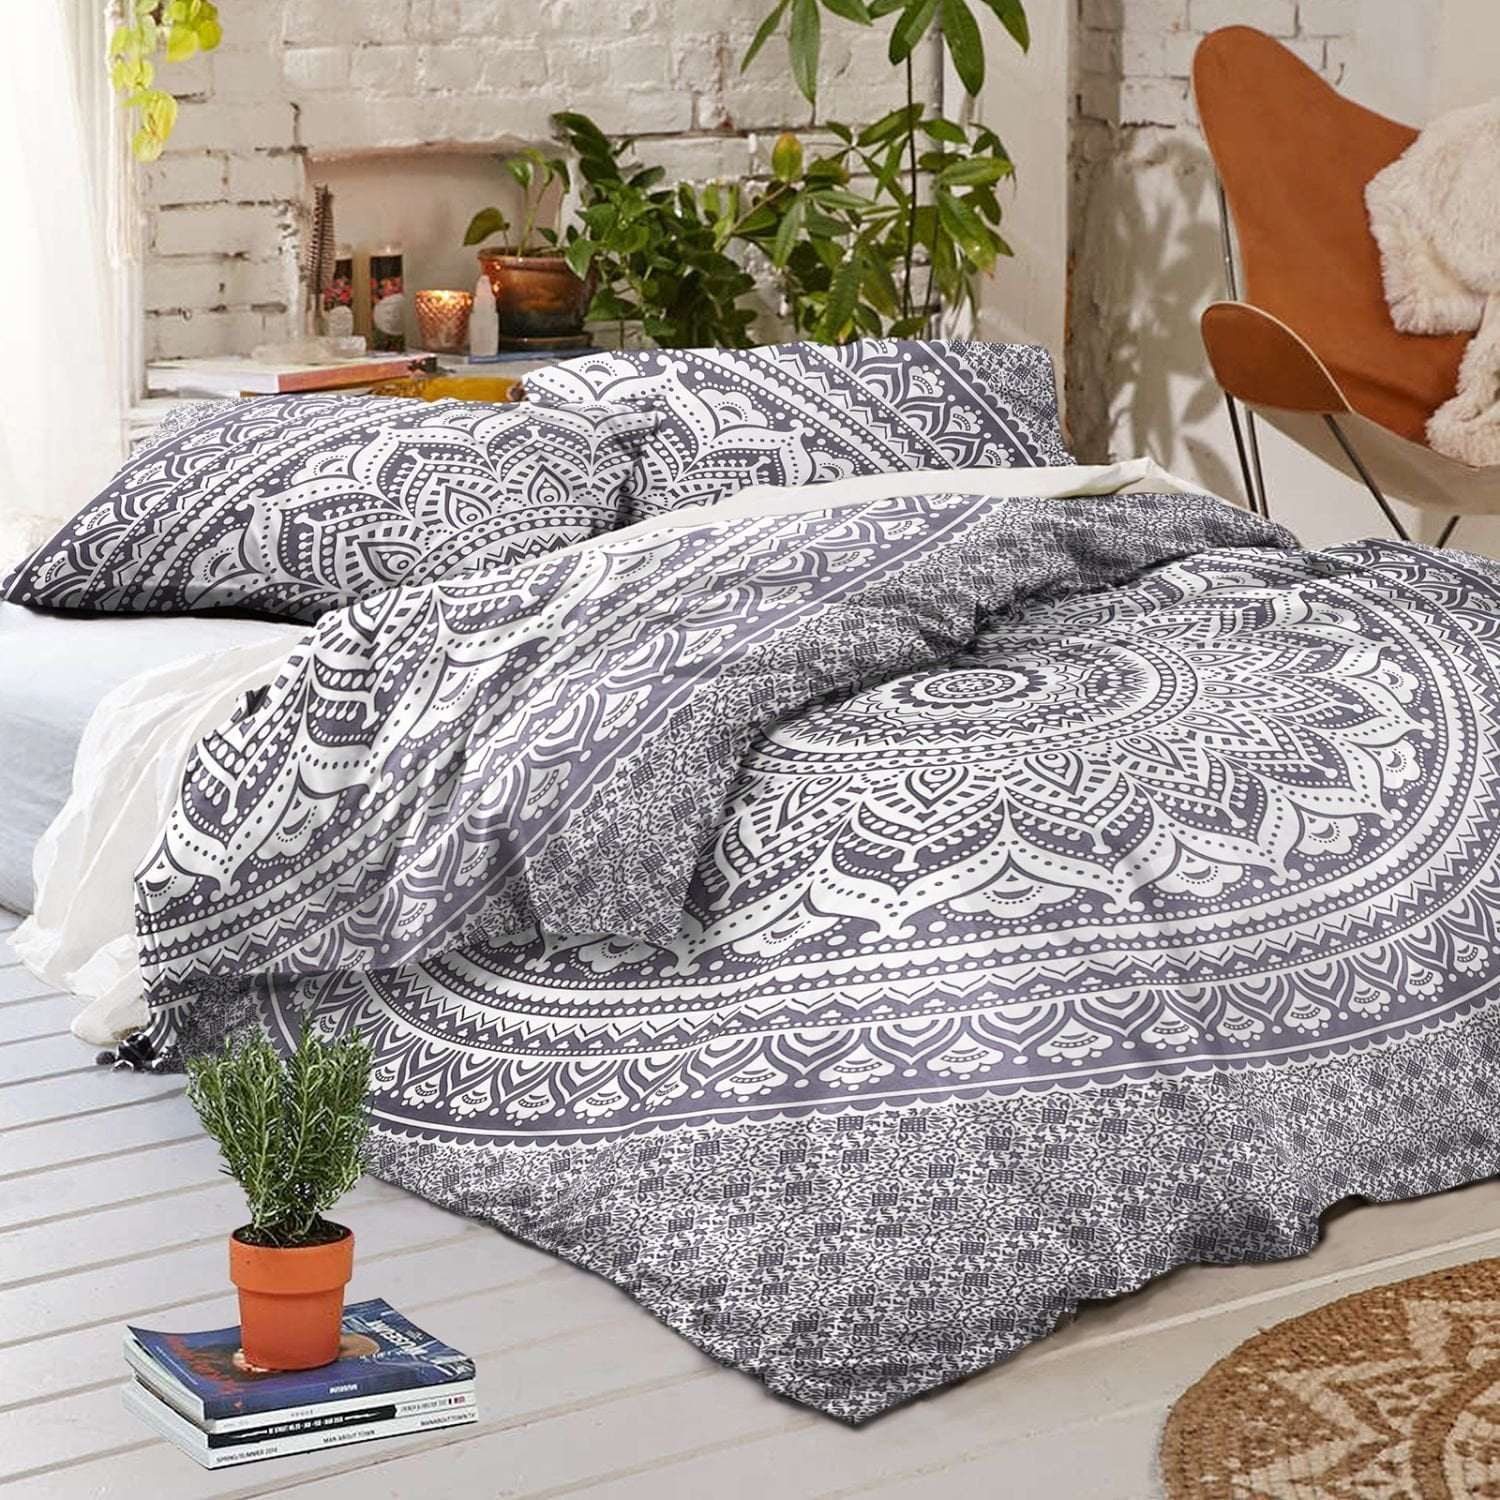 Indian Mandala Duvet Cover Hippie Queen/Twin Quilt Cover Bohemian Bedding Cover 